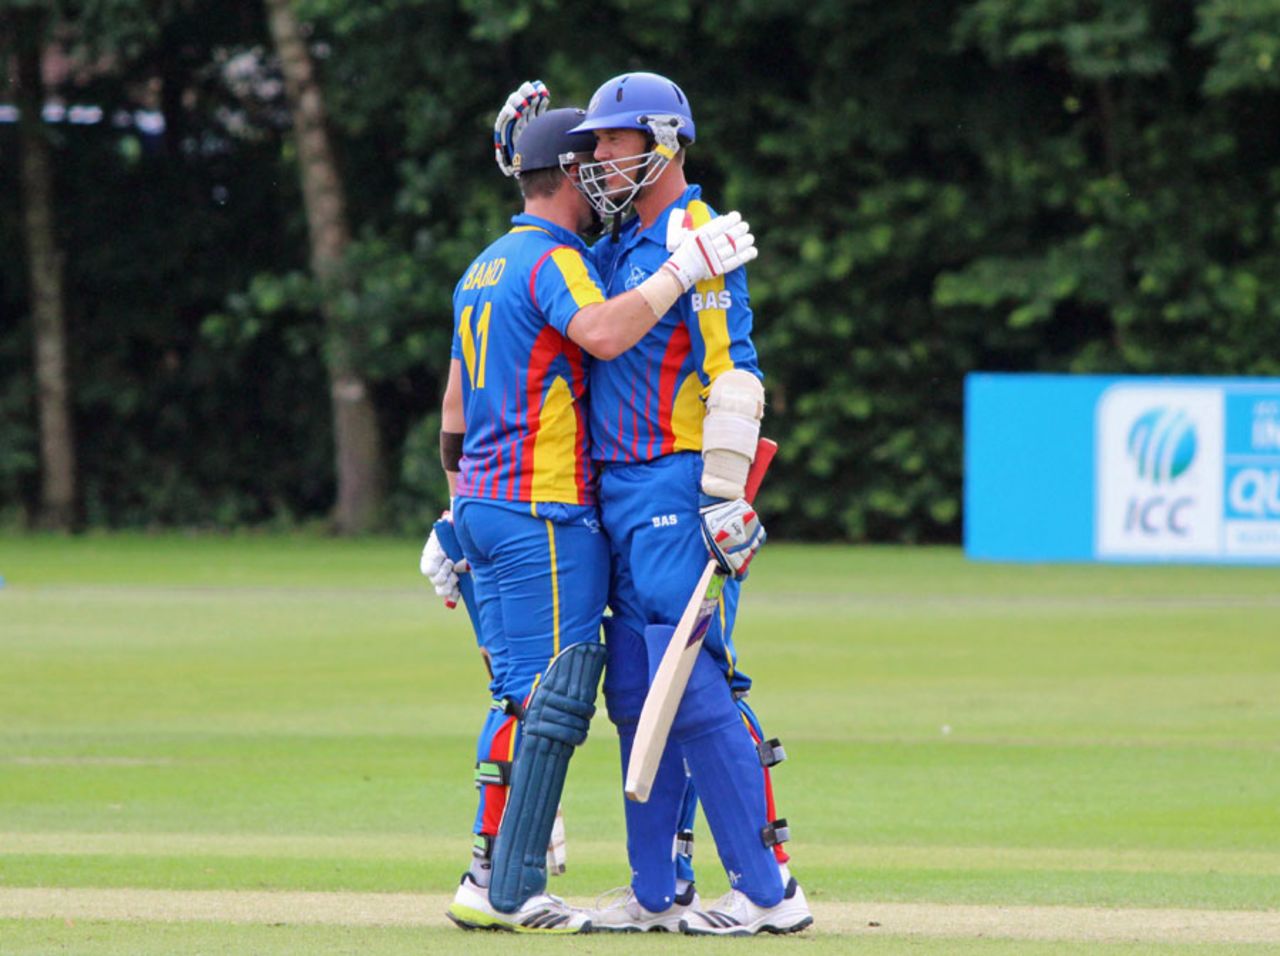 Gerrie Snyman and Stephan Baard shared an opening partnership of 97 runs, Namibia v United States of America, World Twenty20 Qualifier, Group A, Belfast, July 13, 2015